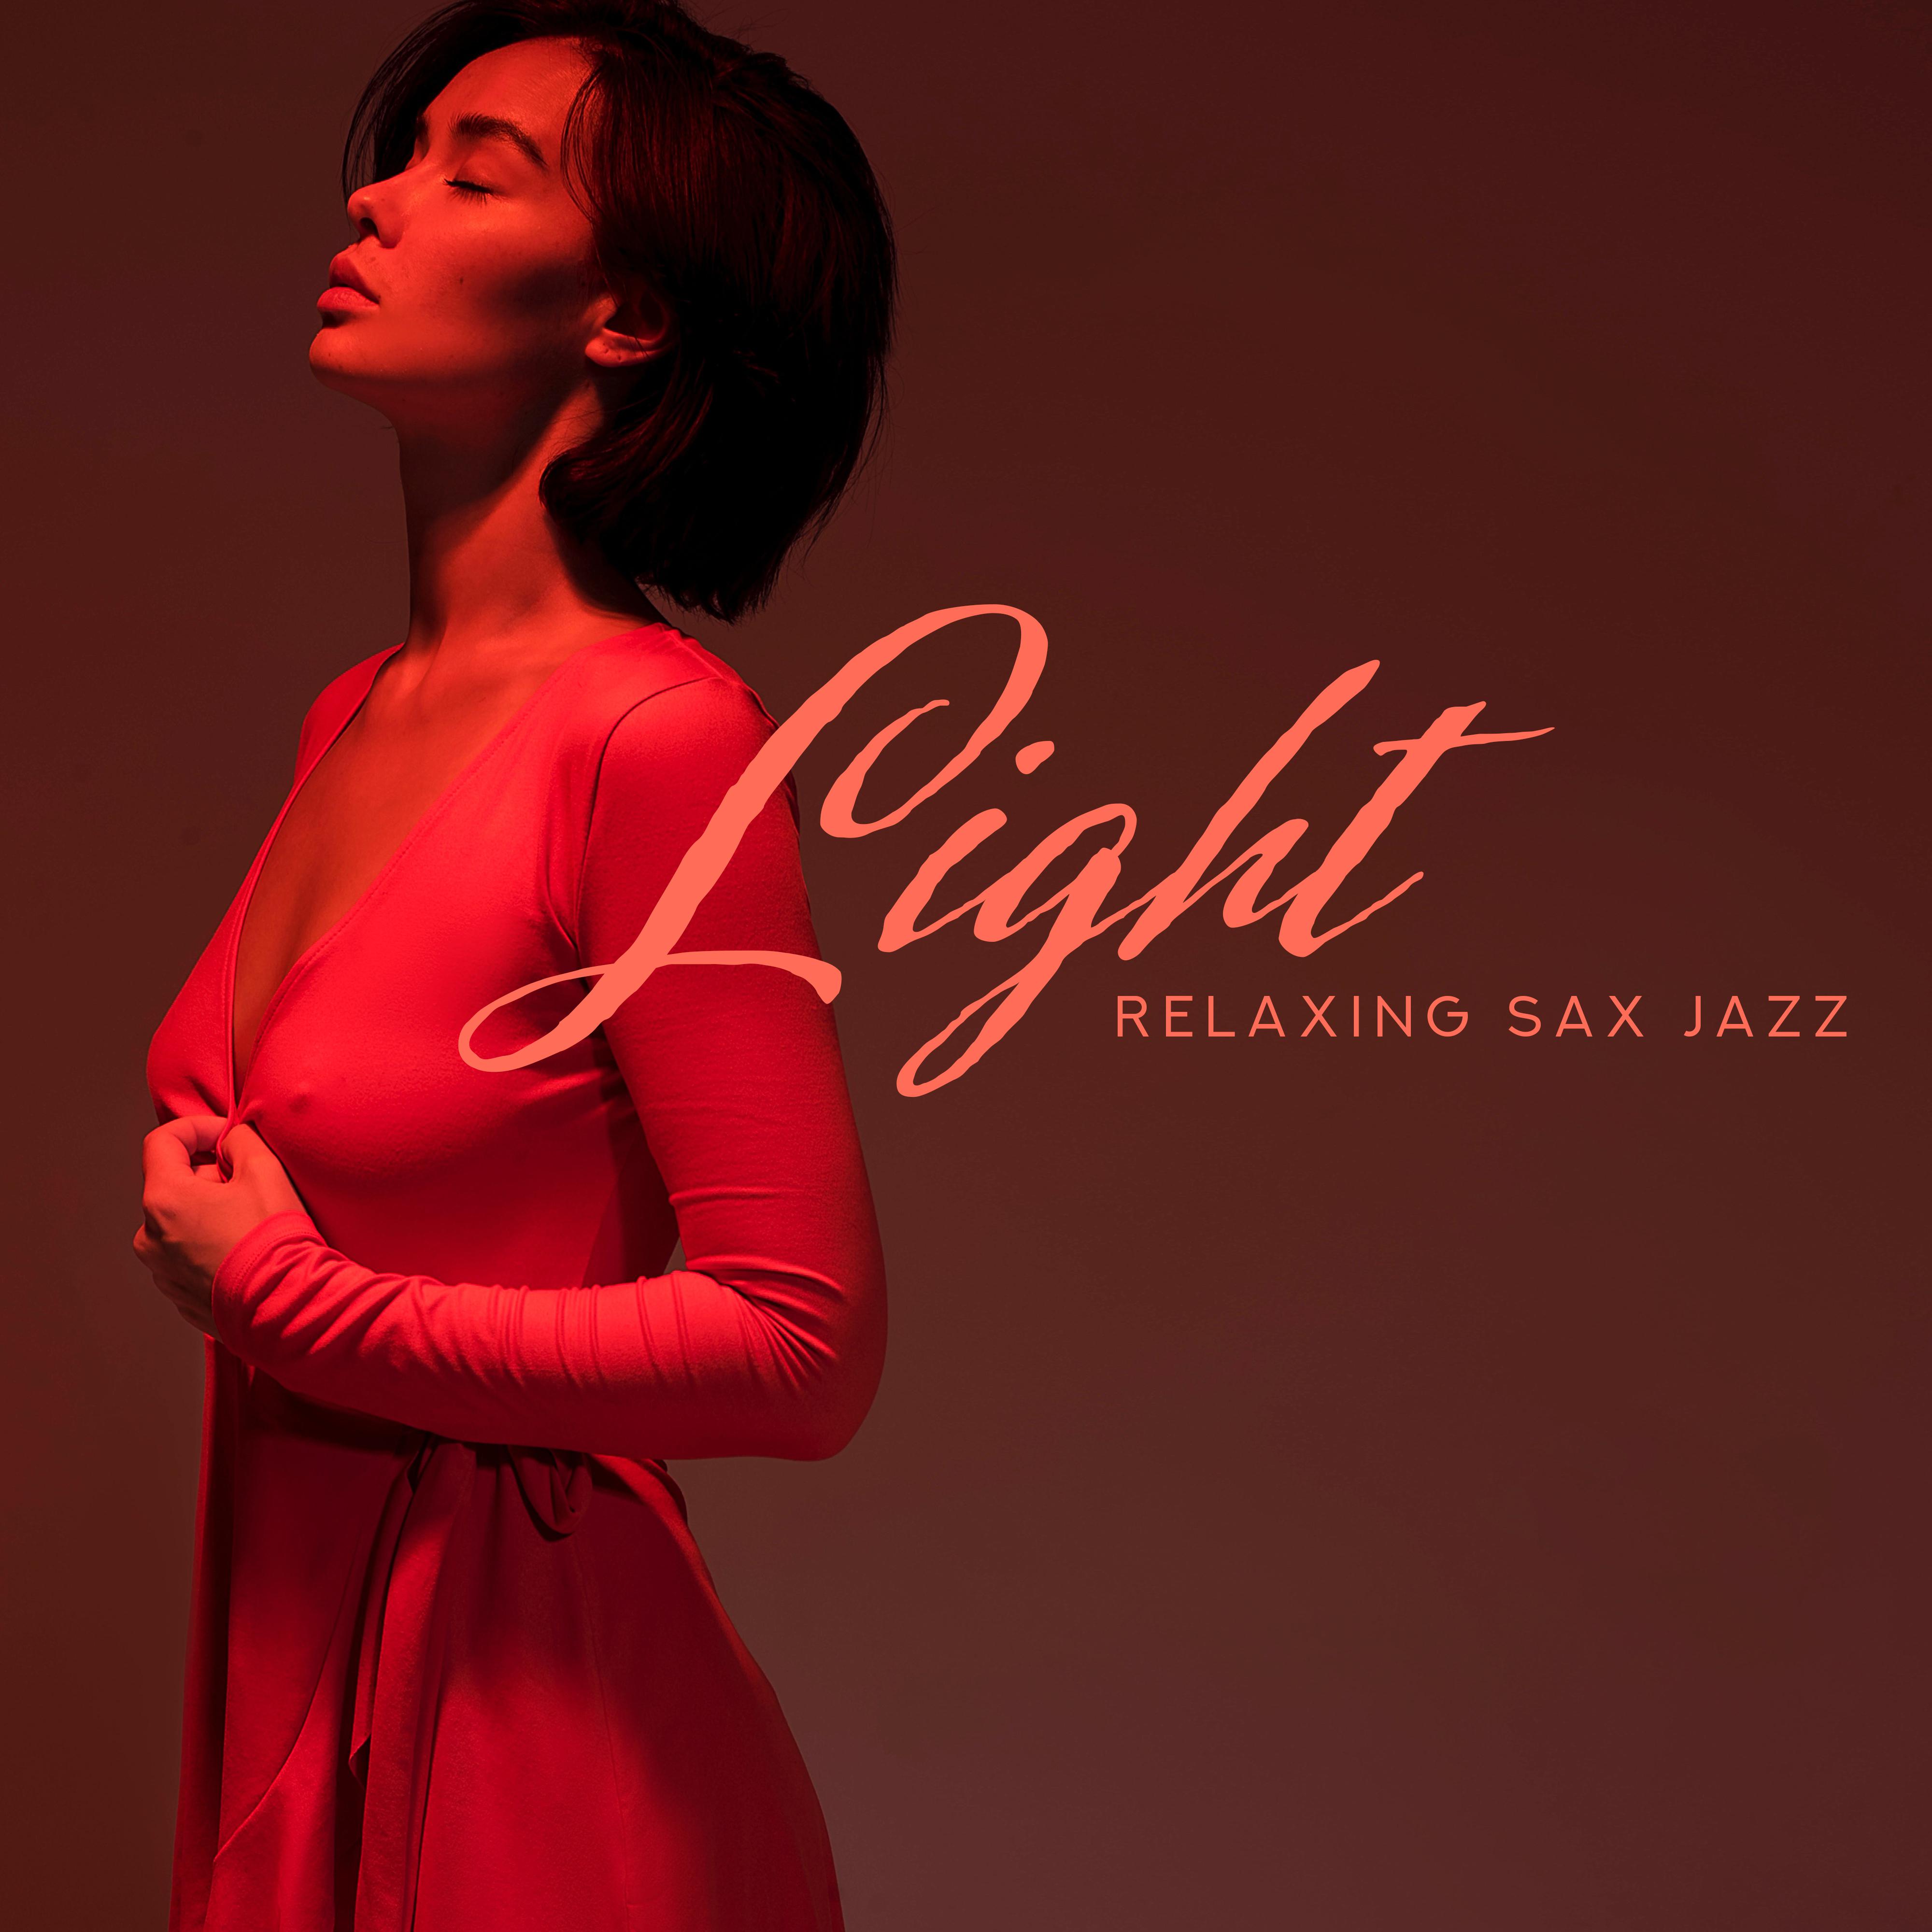 Light Relaxing Sax Jazz – 2019 Smooth Jazz Music Selection for Total Relax, Calming Down, Full Rest, Soothing Sounds of Saxophone, Piano & More